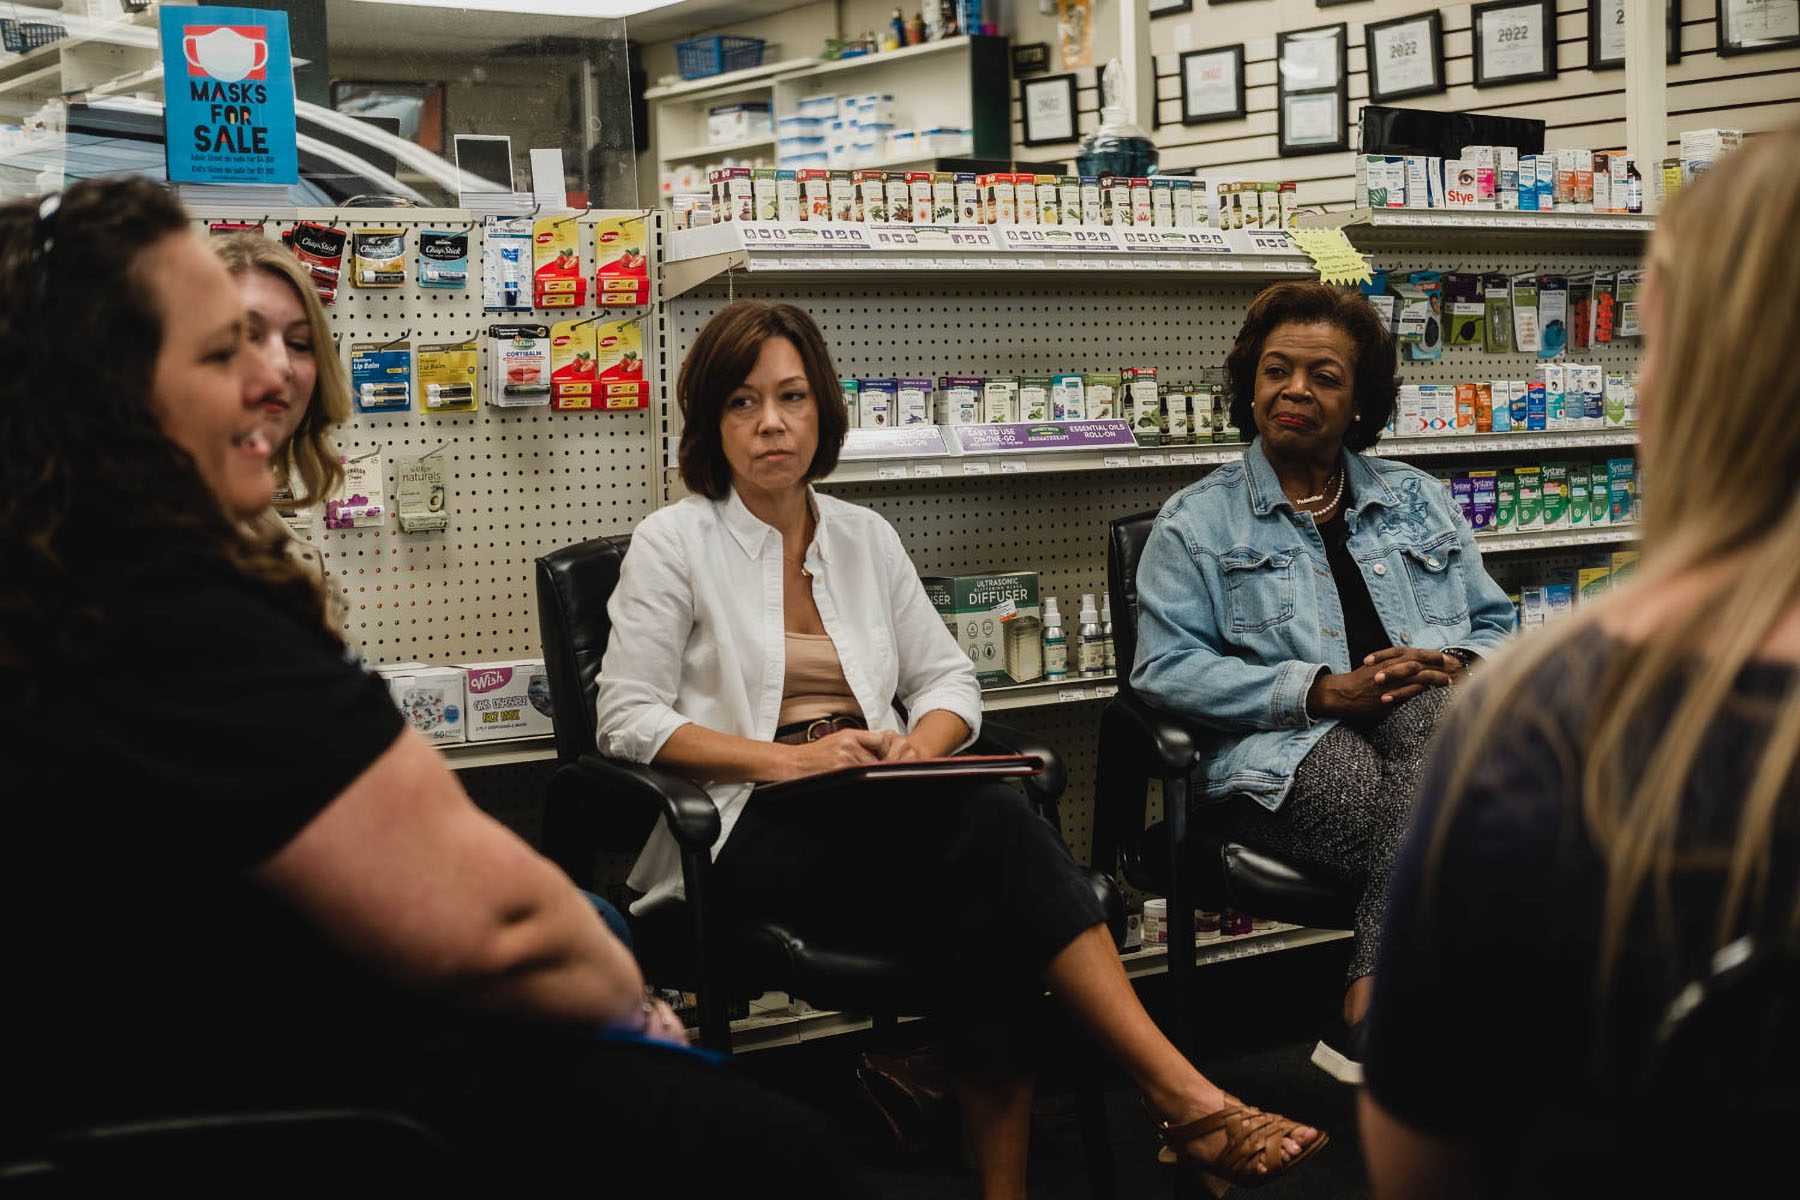 Beasley holds a conversation on lowering prescription drug prices at Akers Pharmacy.